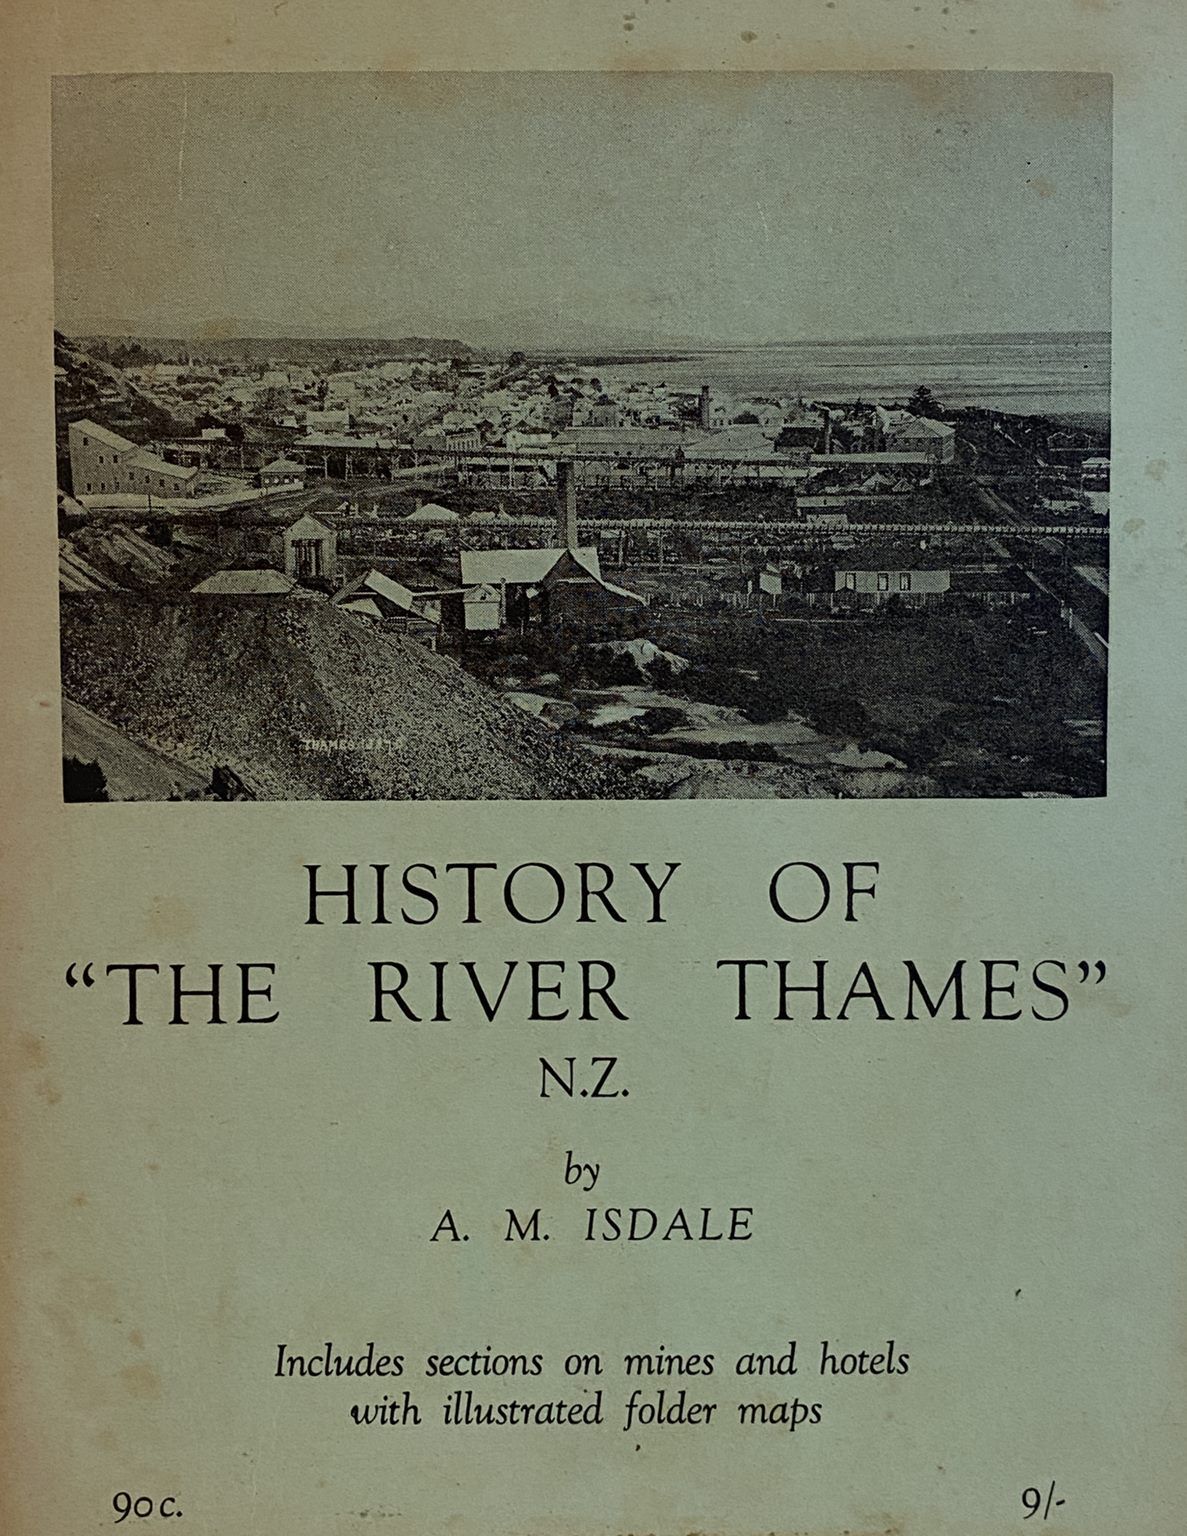 HISTORY OF THE RIVER THAMES NZ